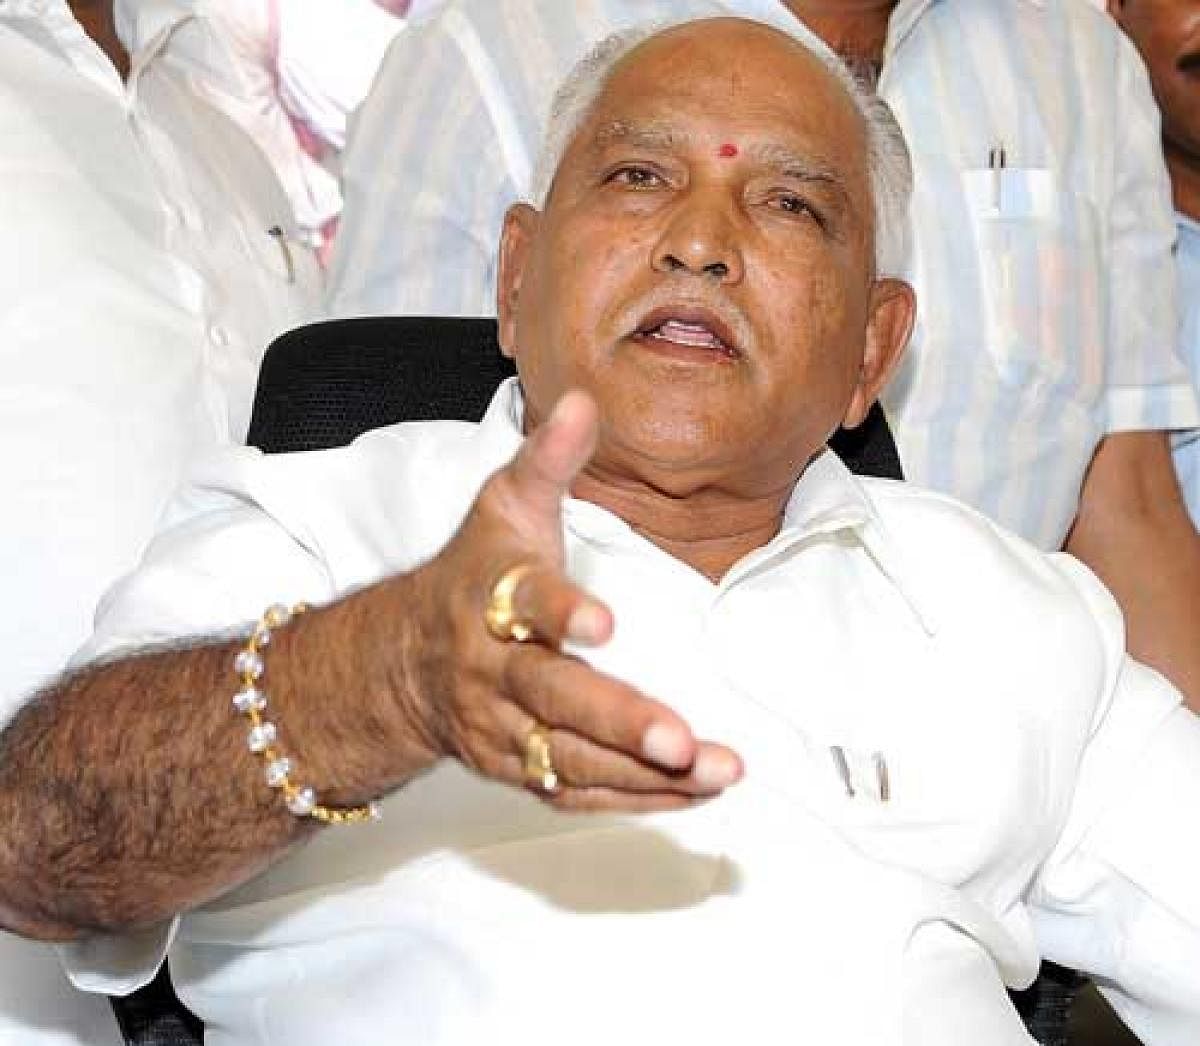 With 3 months left, BSY confident on revenue targets